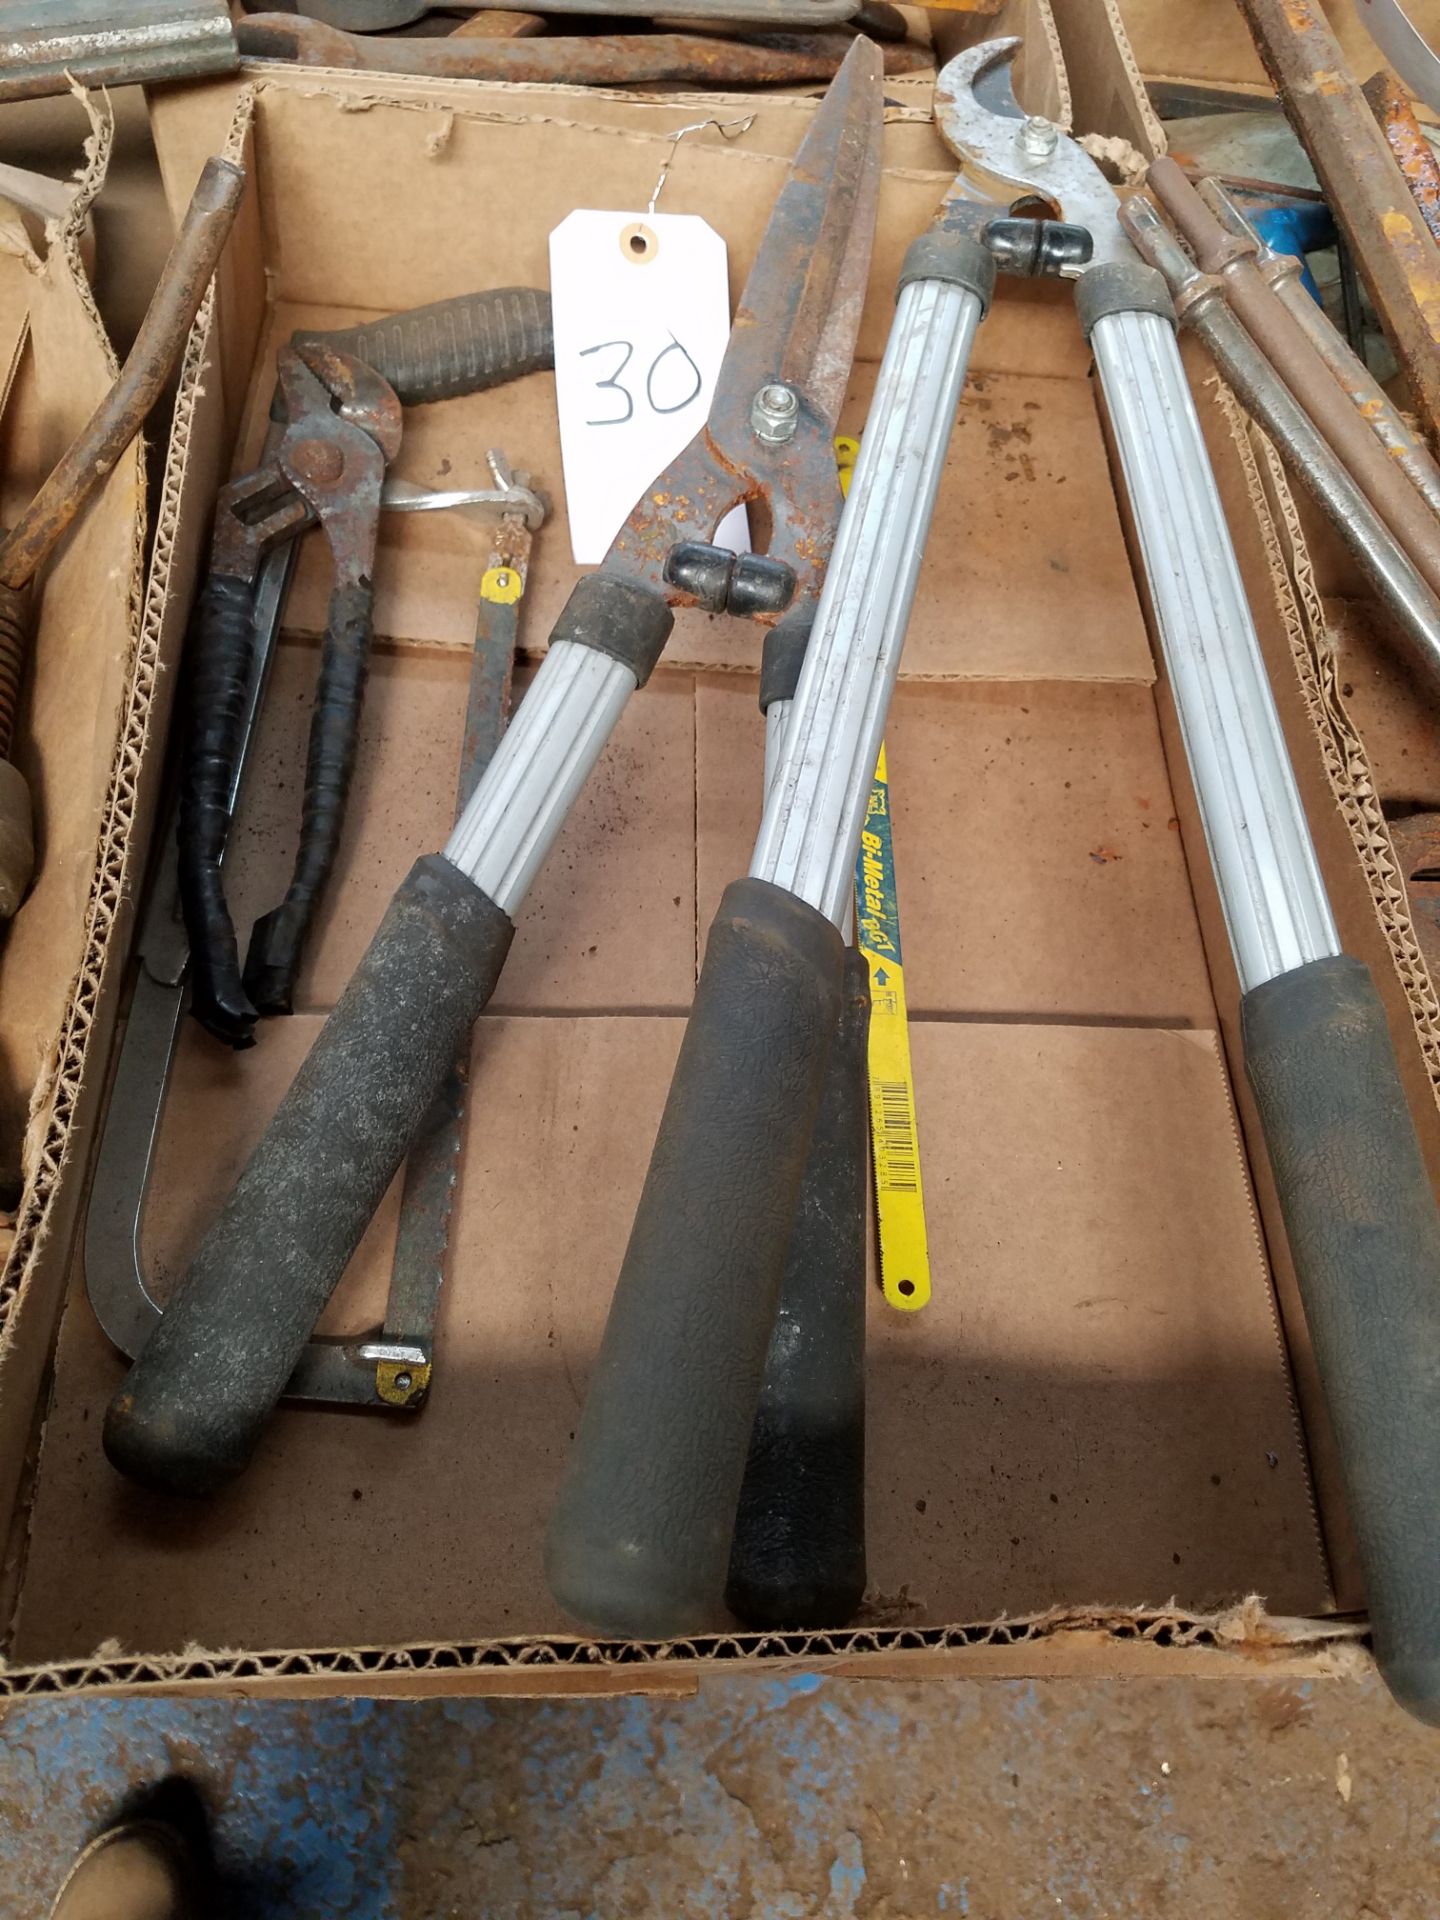 3 BOXES, PRY BARS, ALLEN WRENCHES, HAND SHEARS